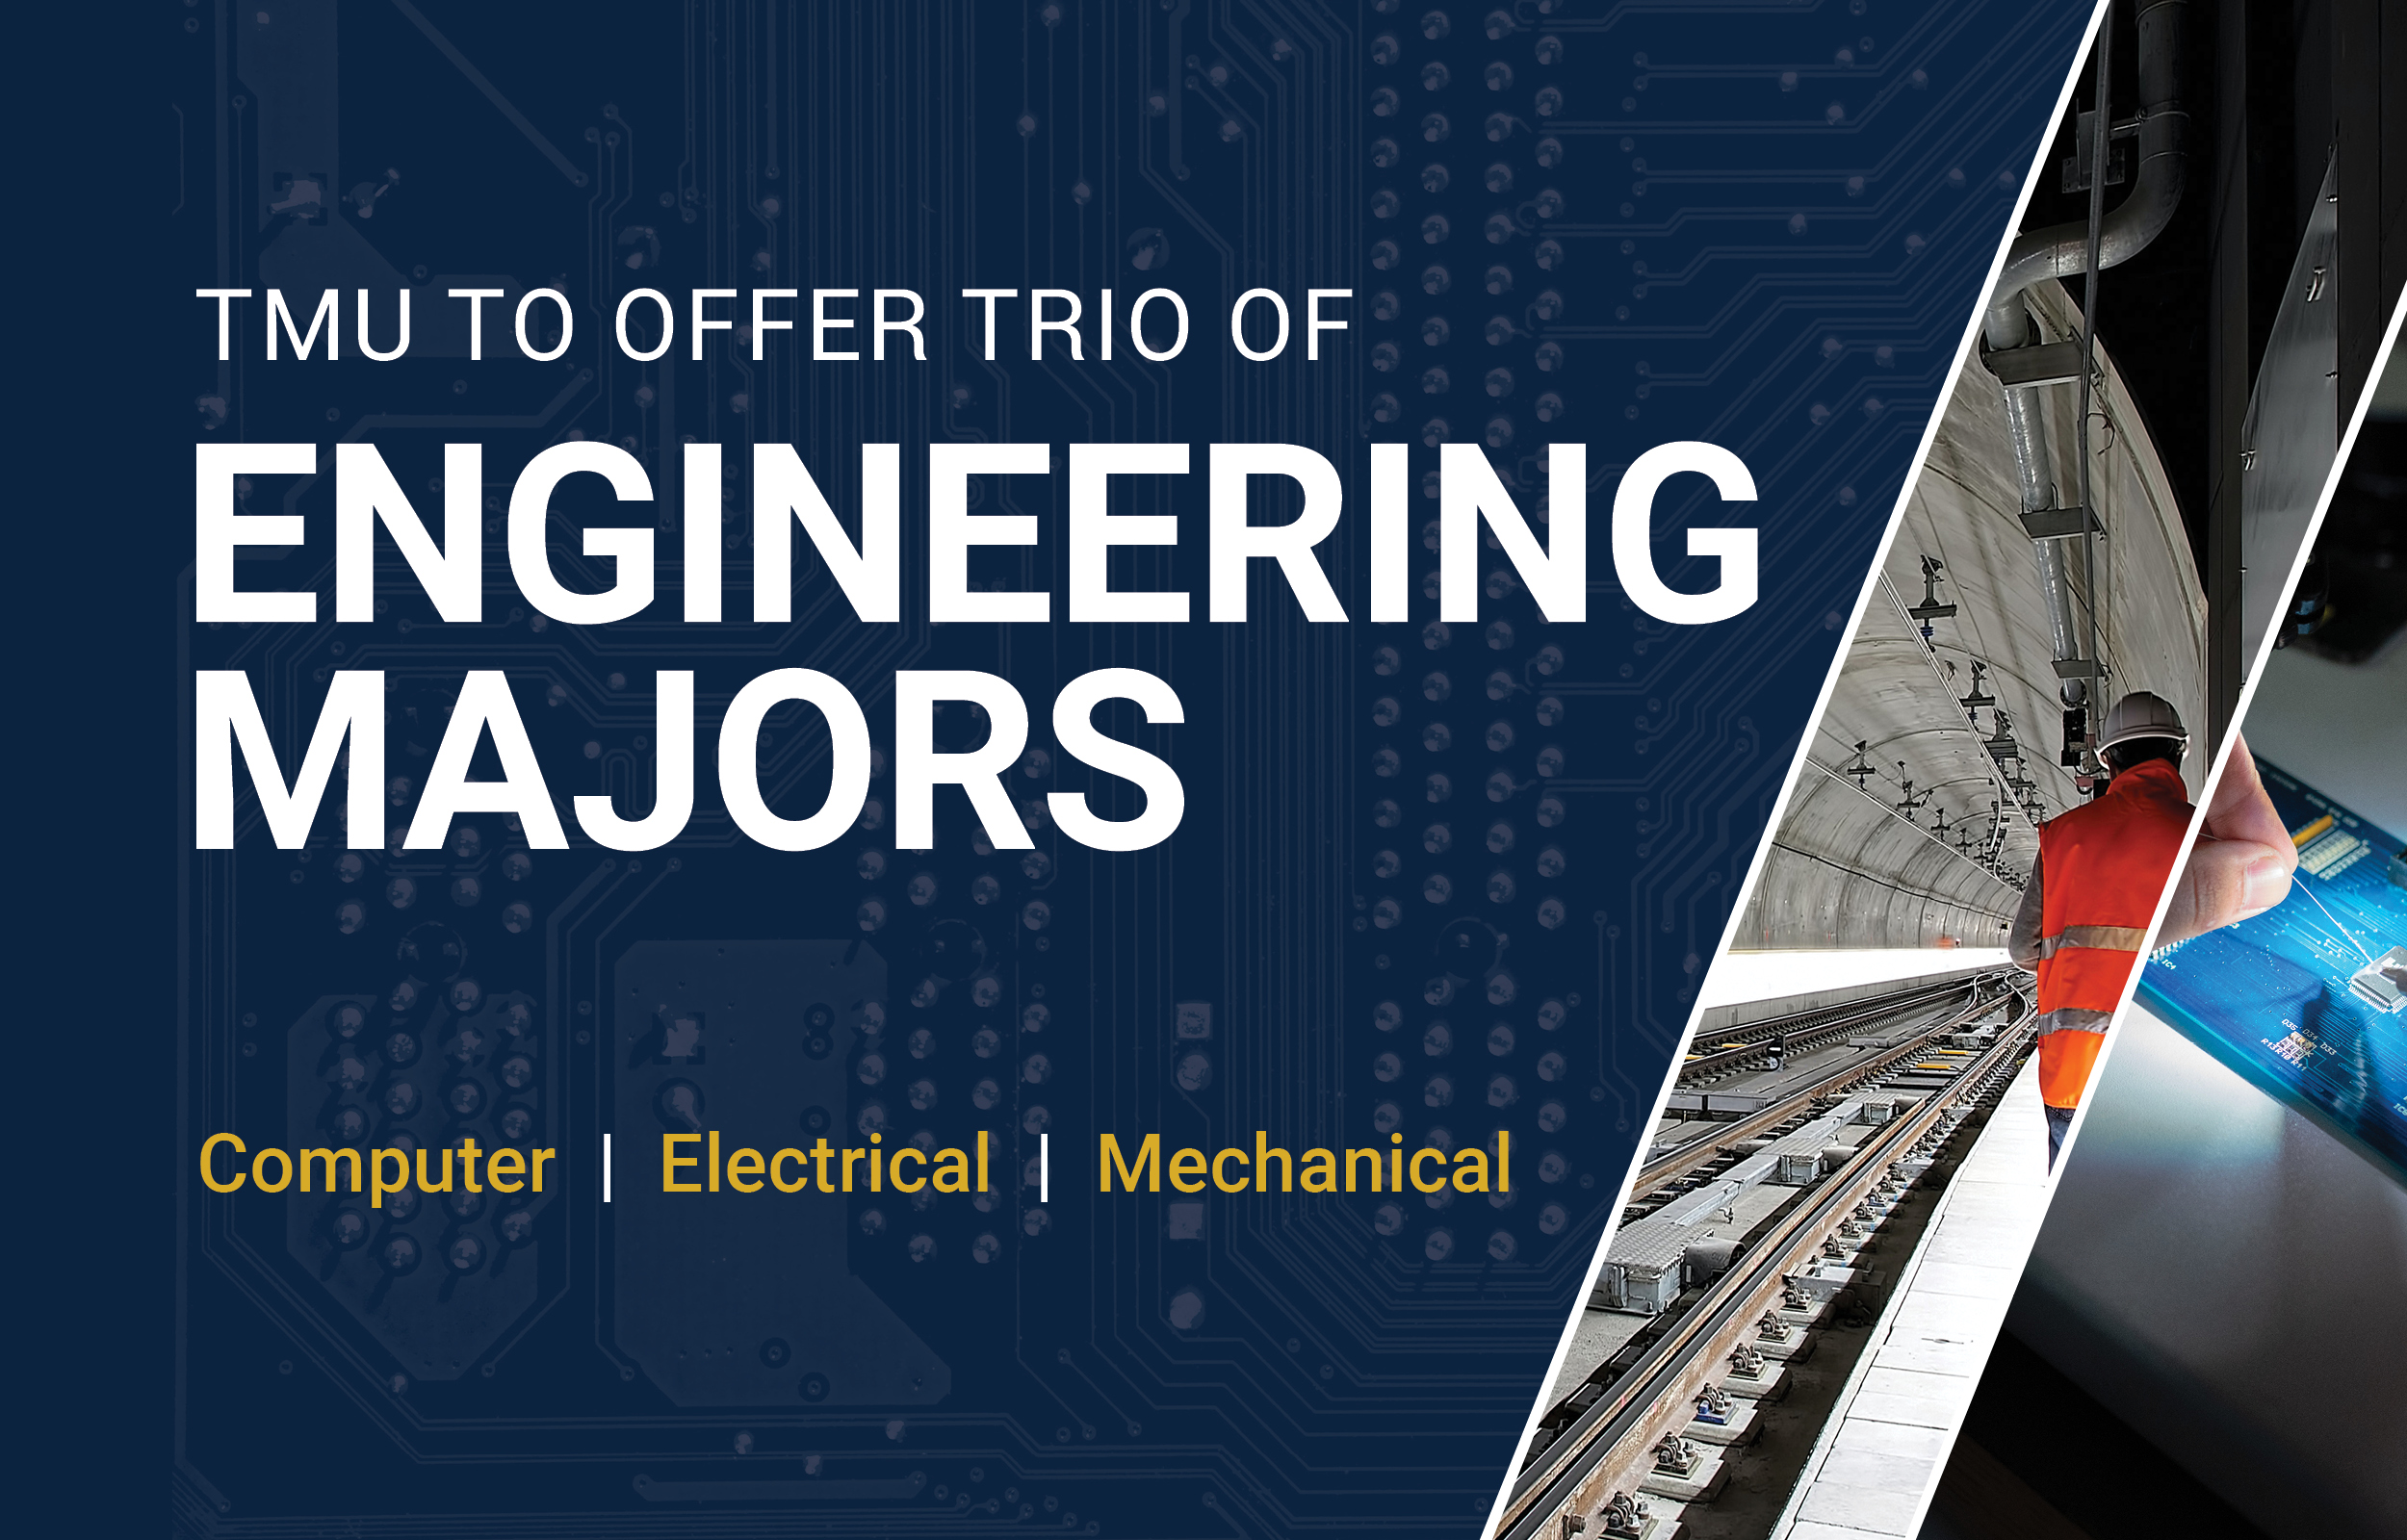 TMU To Offer Trio of Engineering Majors